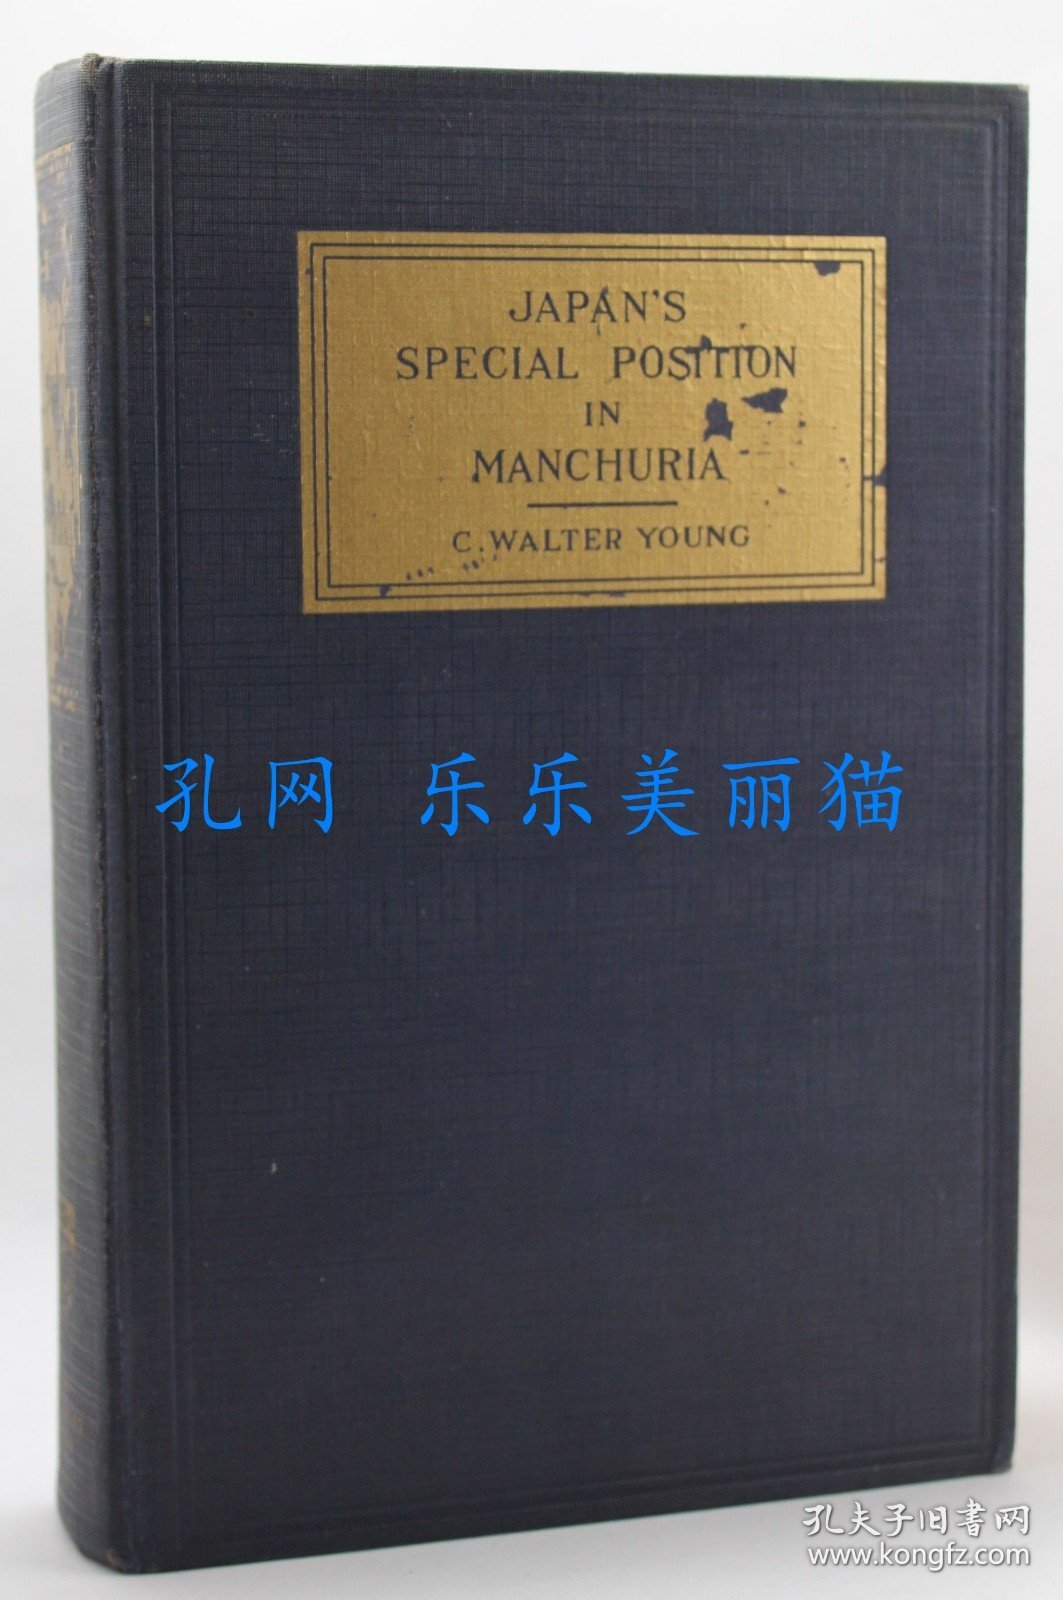 Japan's Special Position in Manchuria